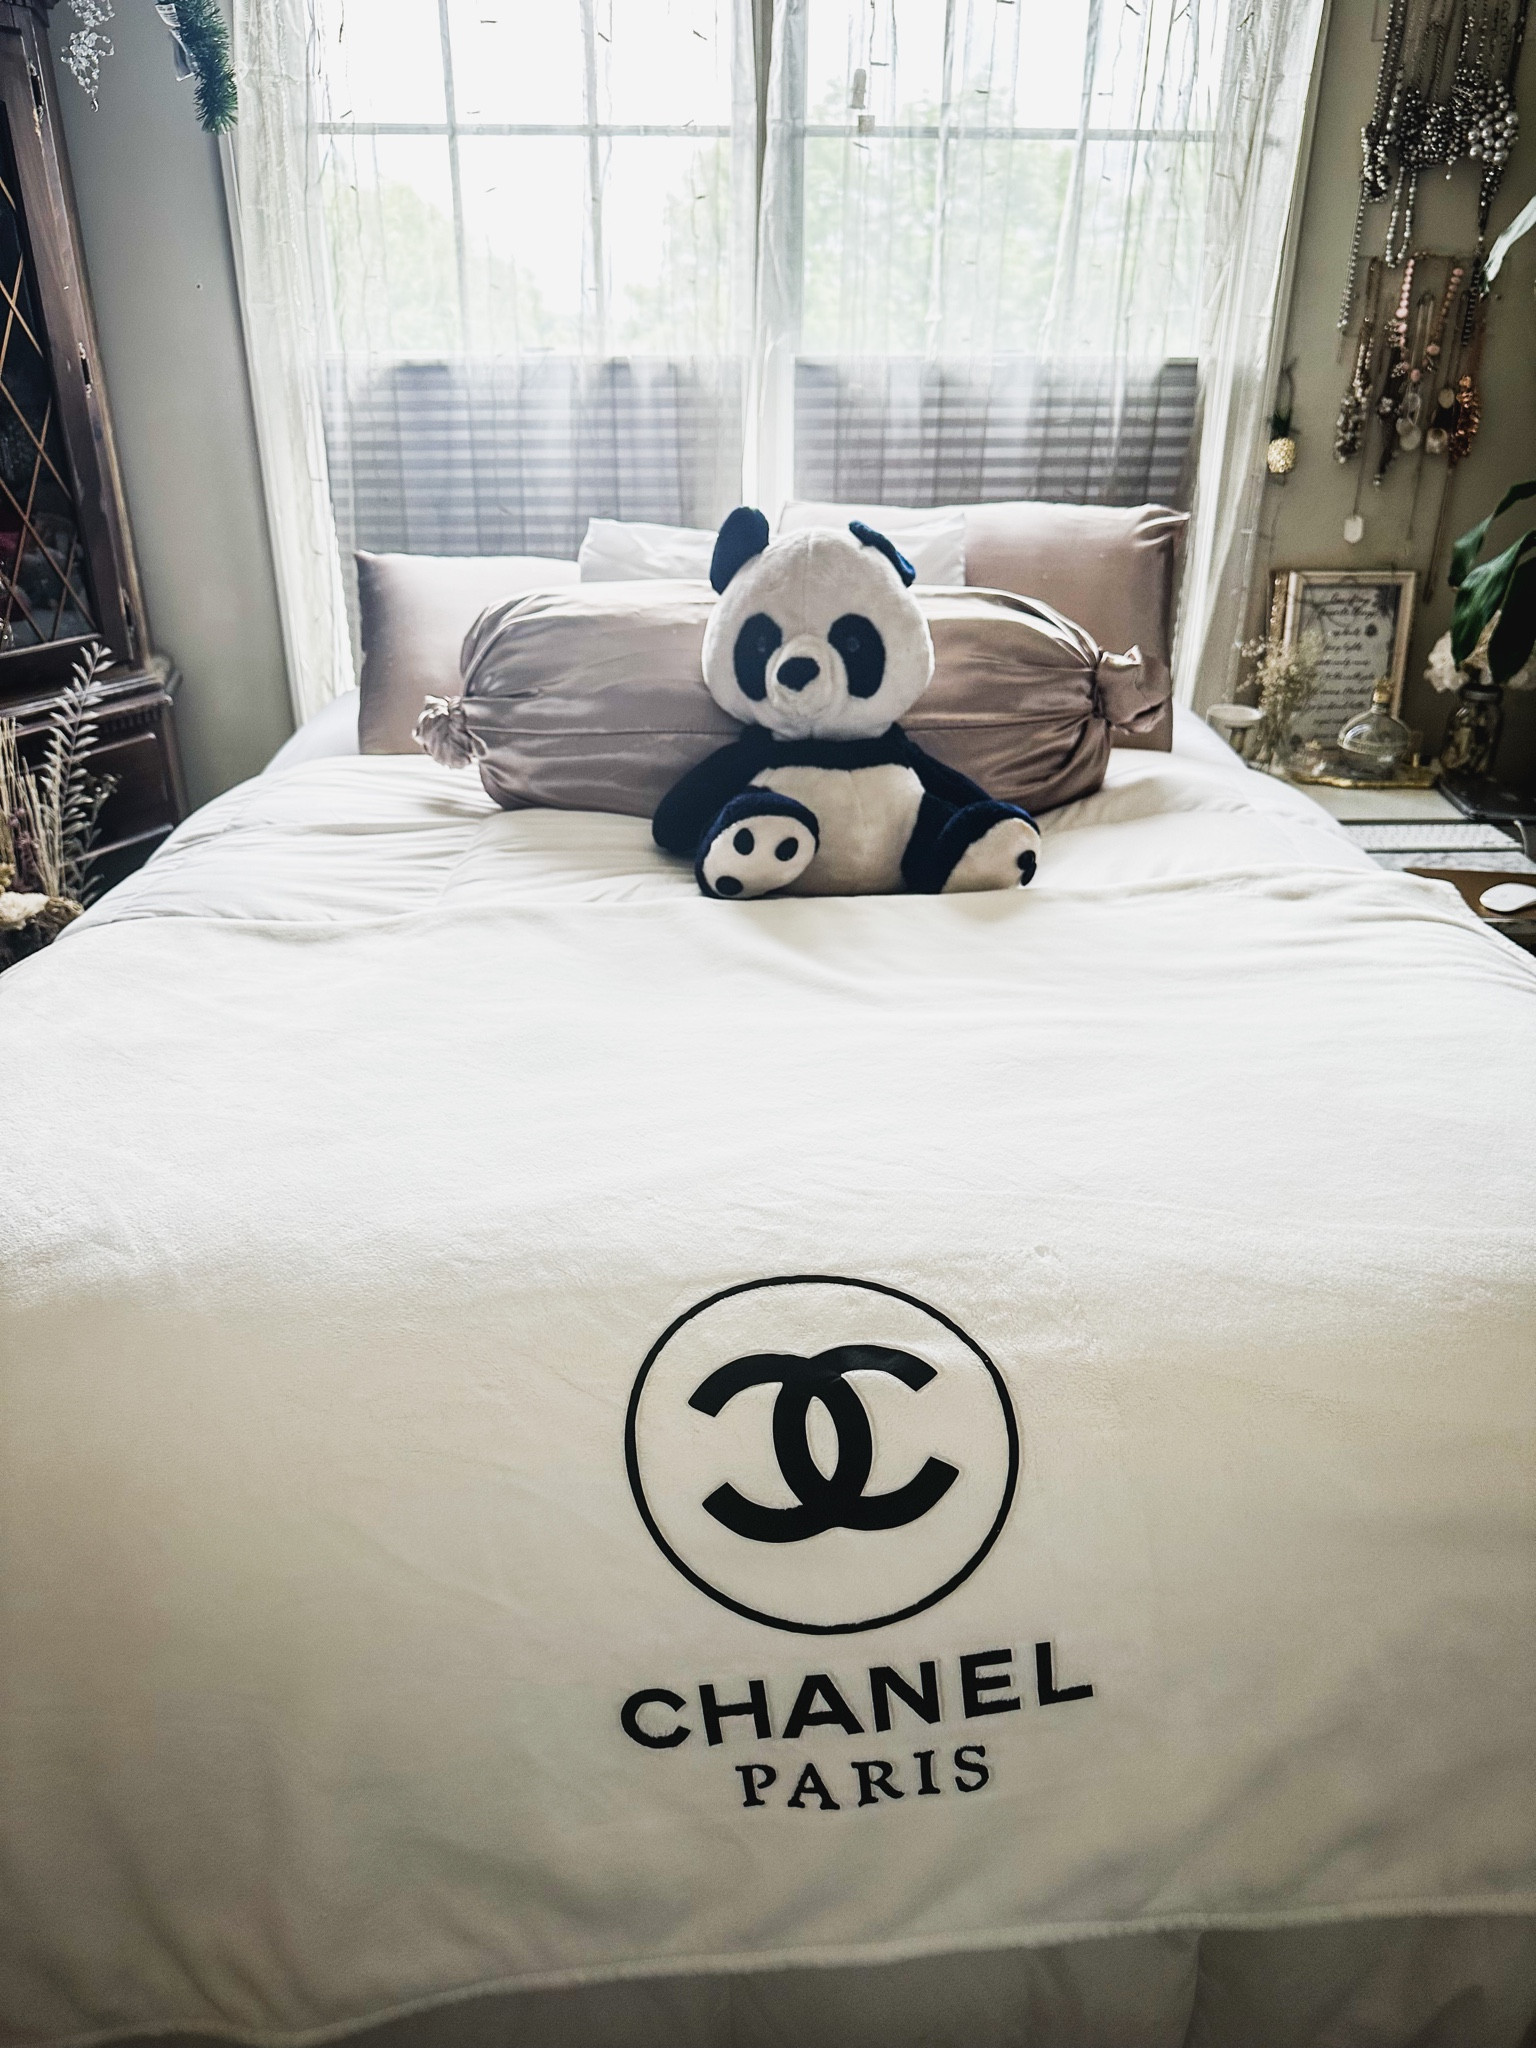 Chanel Bedding Set *1 LEFT* for Sale in Beverly Hills, CA - OfferUp